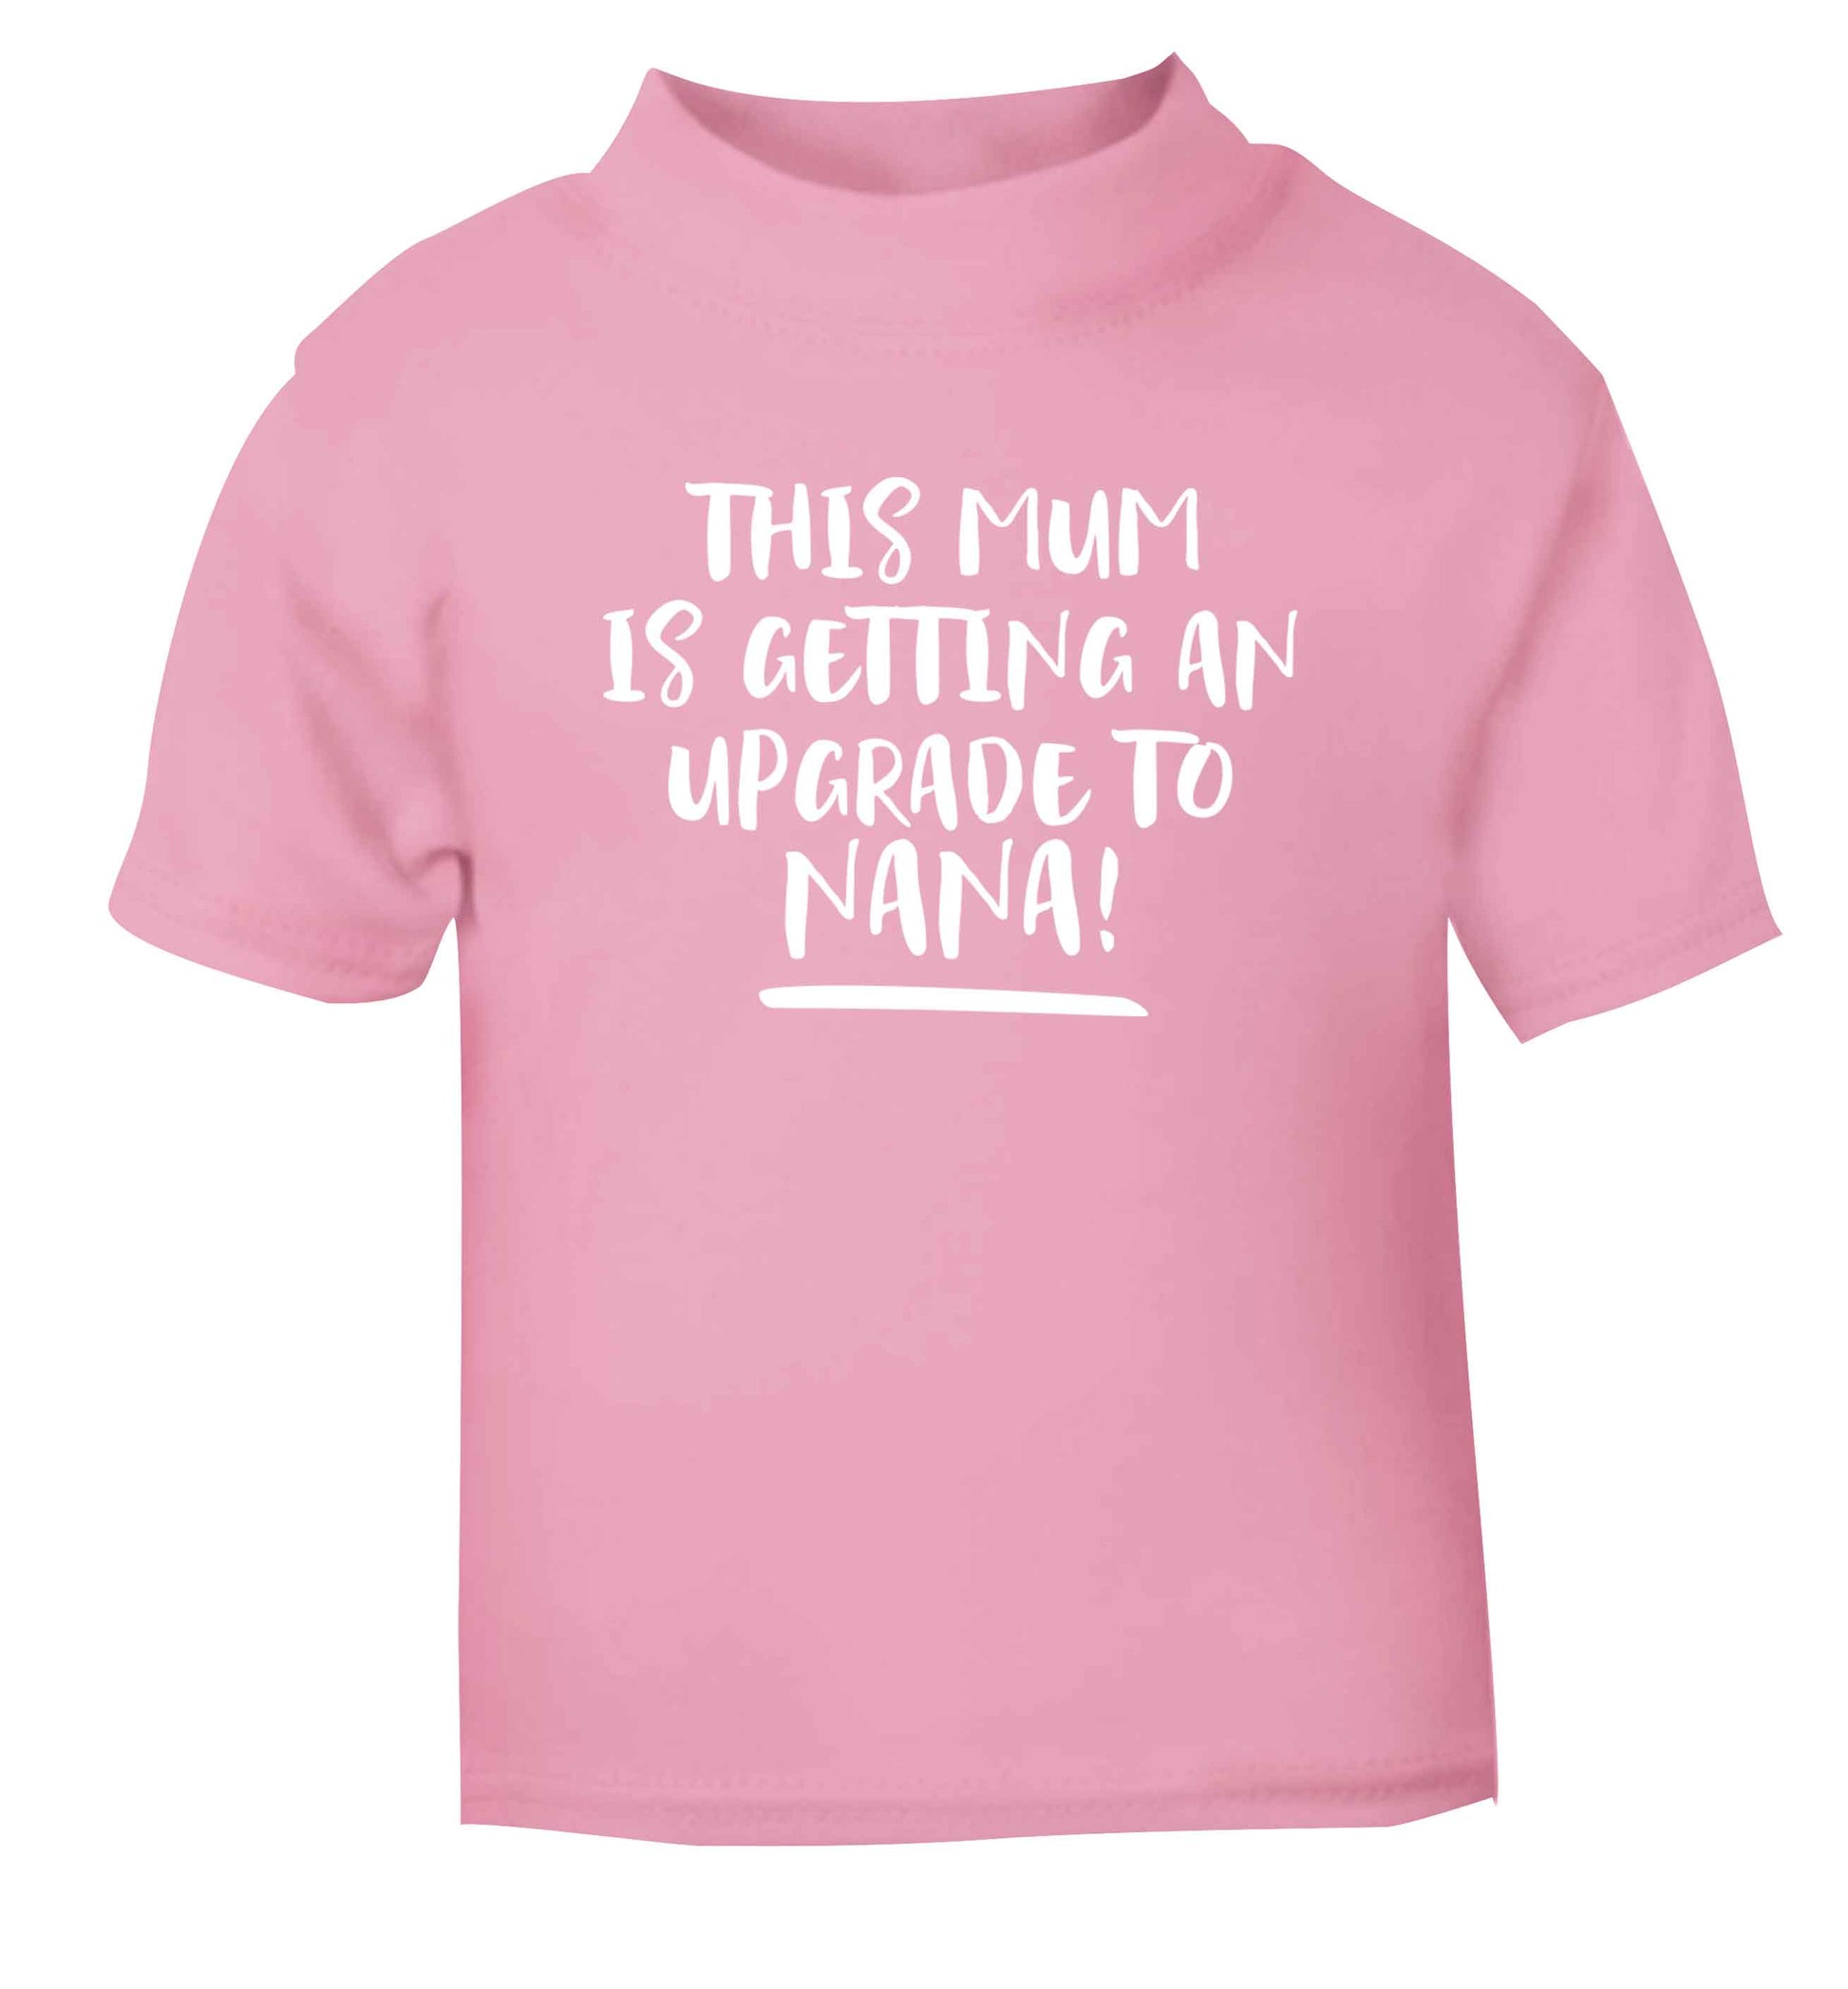 This mum is getting an upgrade to nana! light pink Baby Toddler Tshirt 2 Years